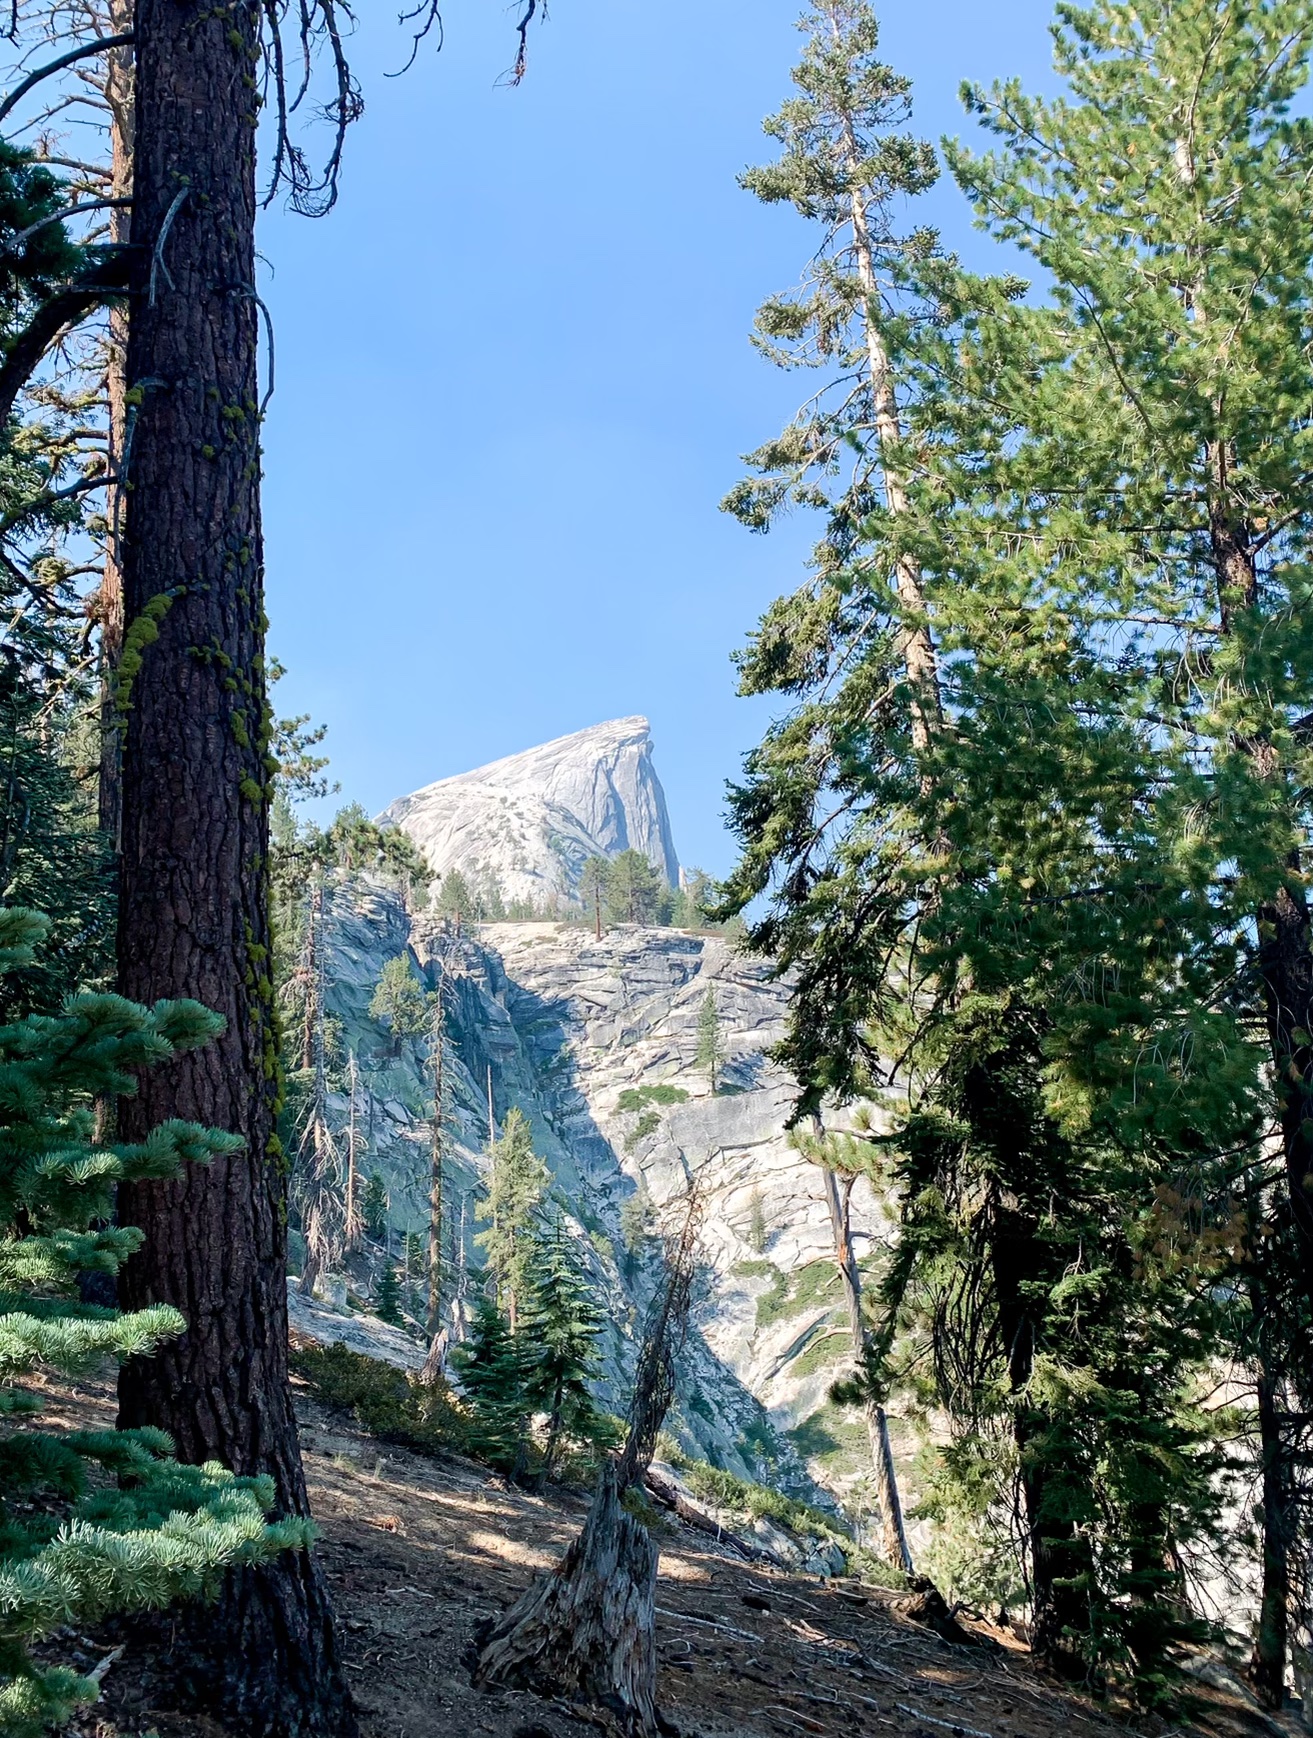 View of Half Dome from Little Yosemite Valley